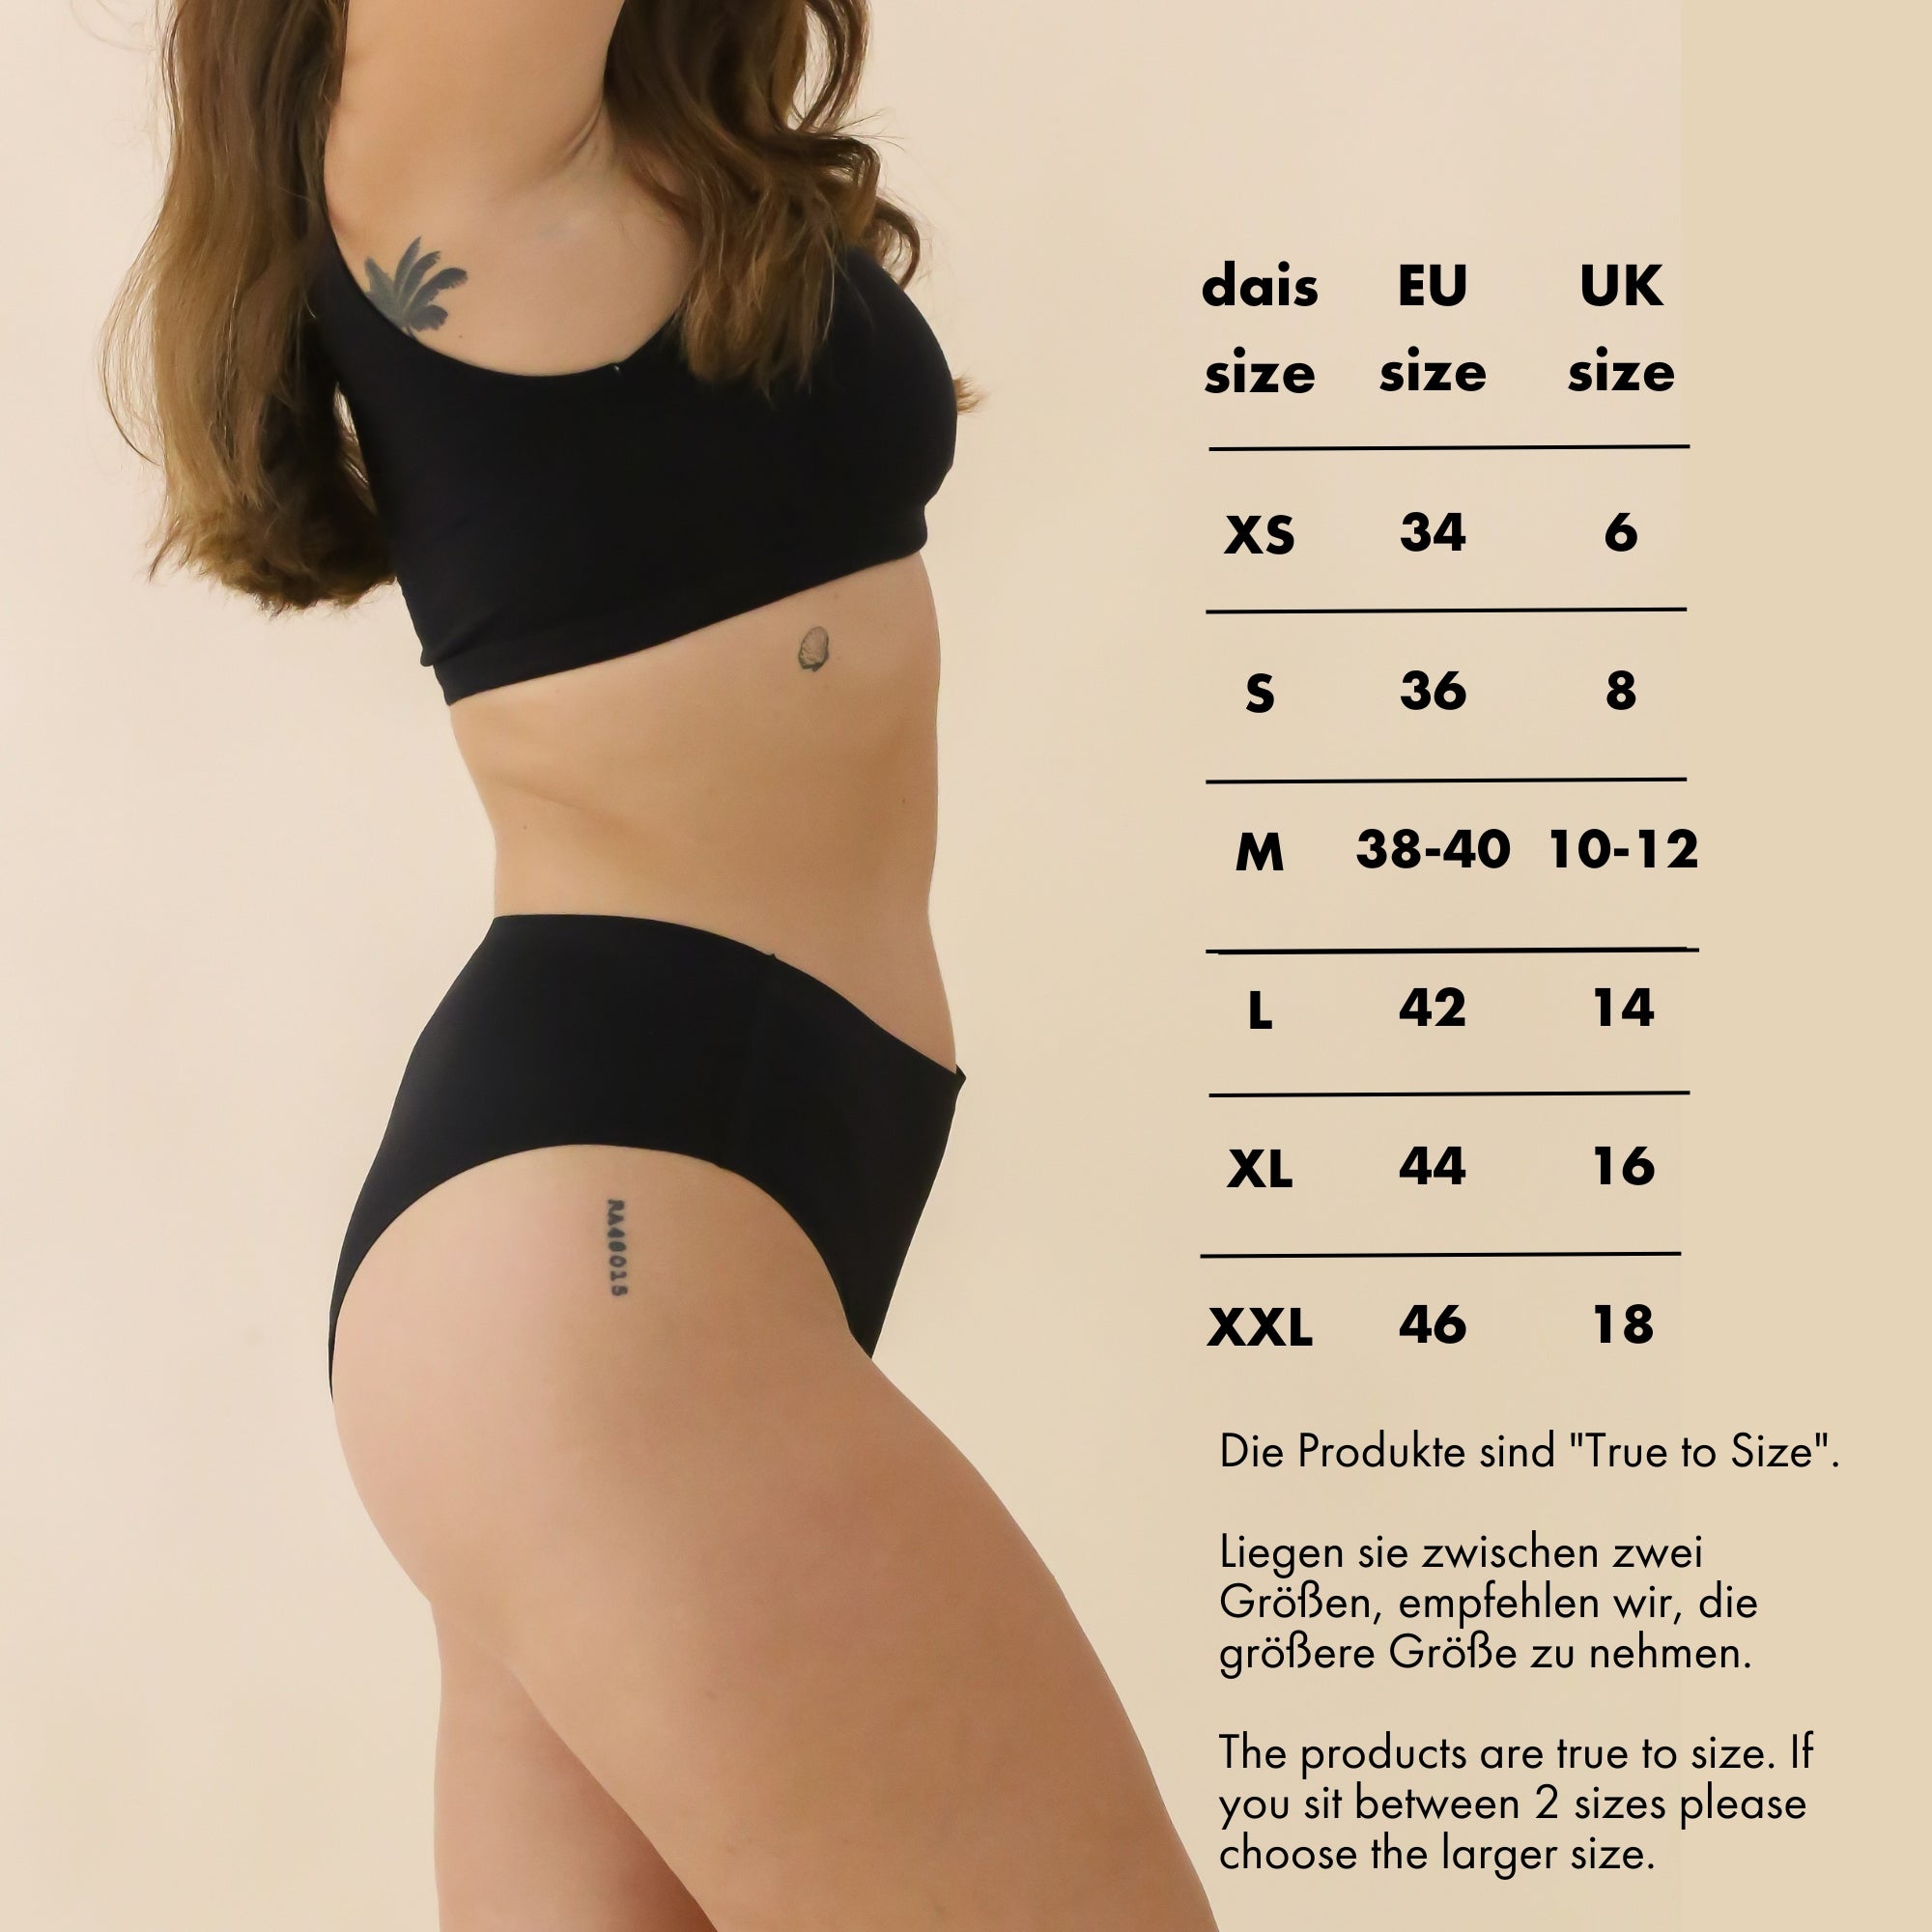 Size chart for dais period underwear in cheeky cut with options XS, S, M, L, XL with EU and UK size conversions.